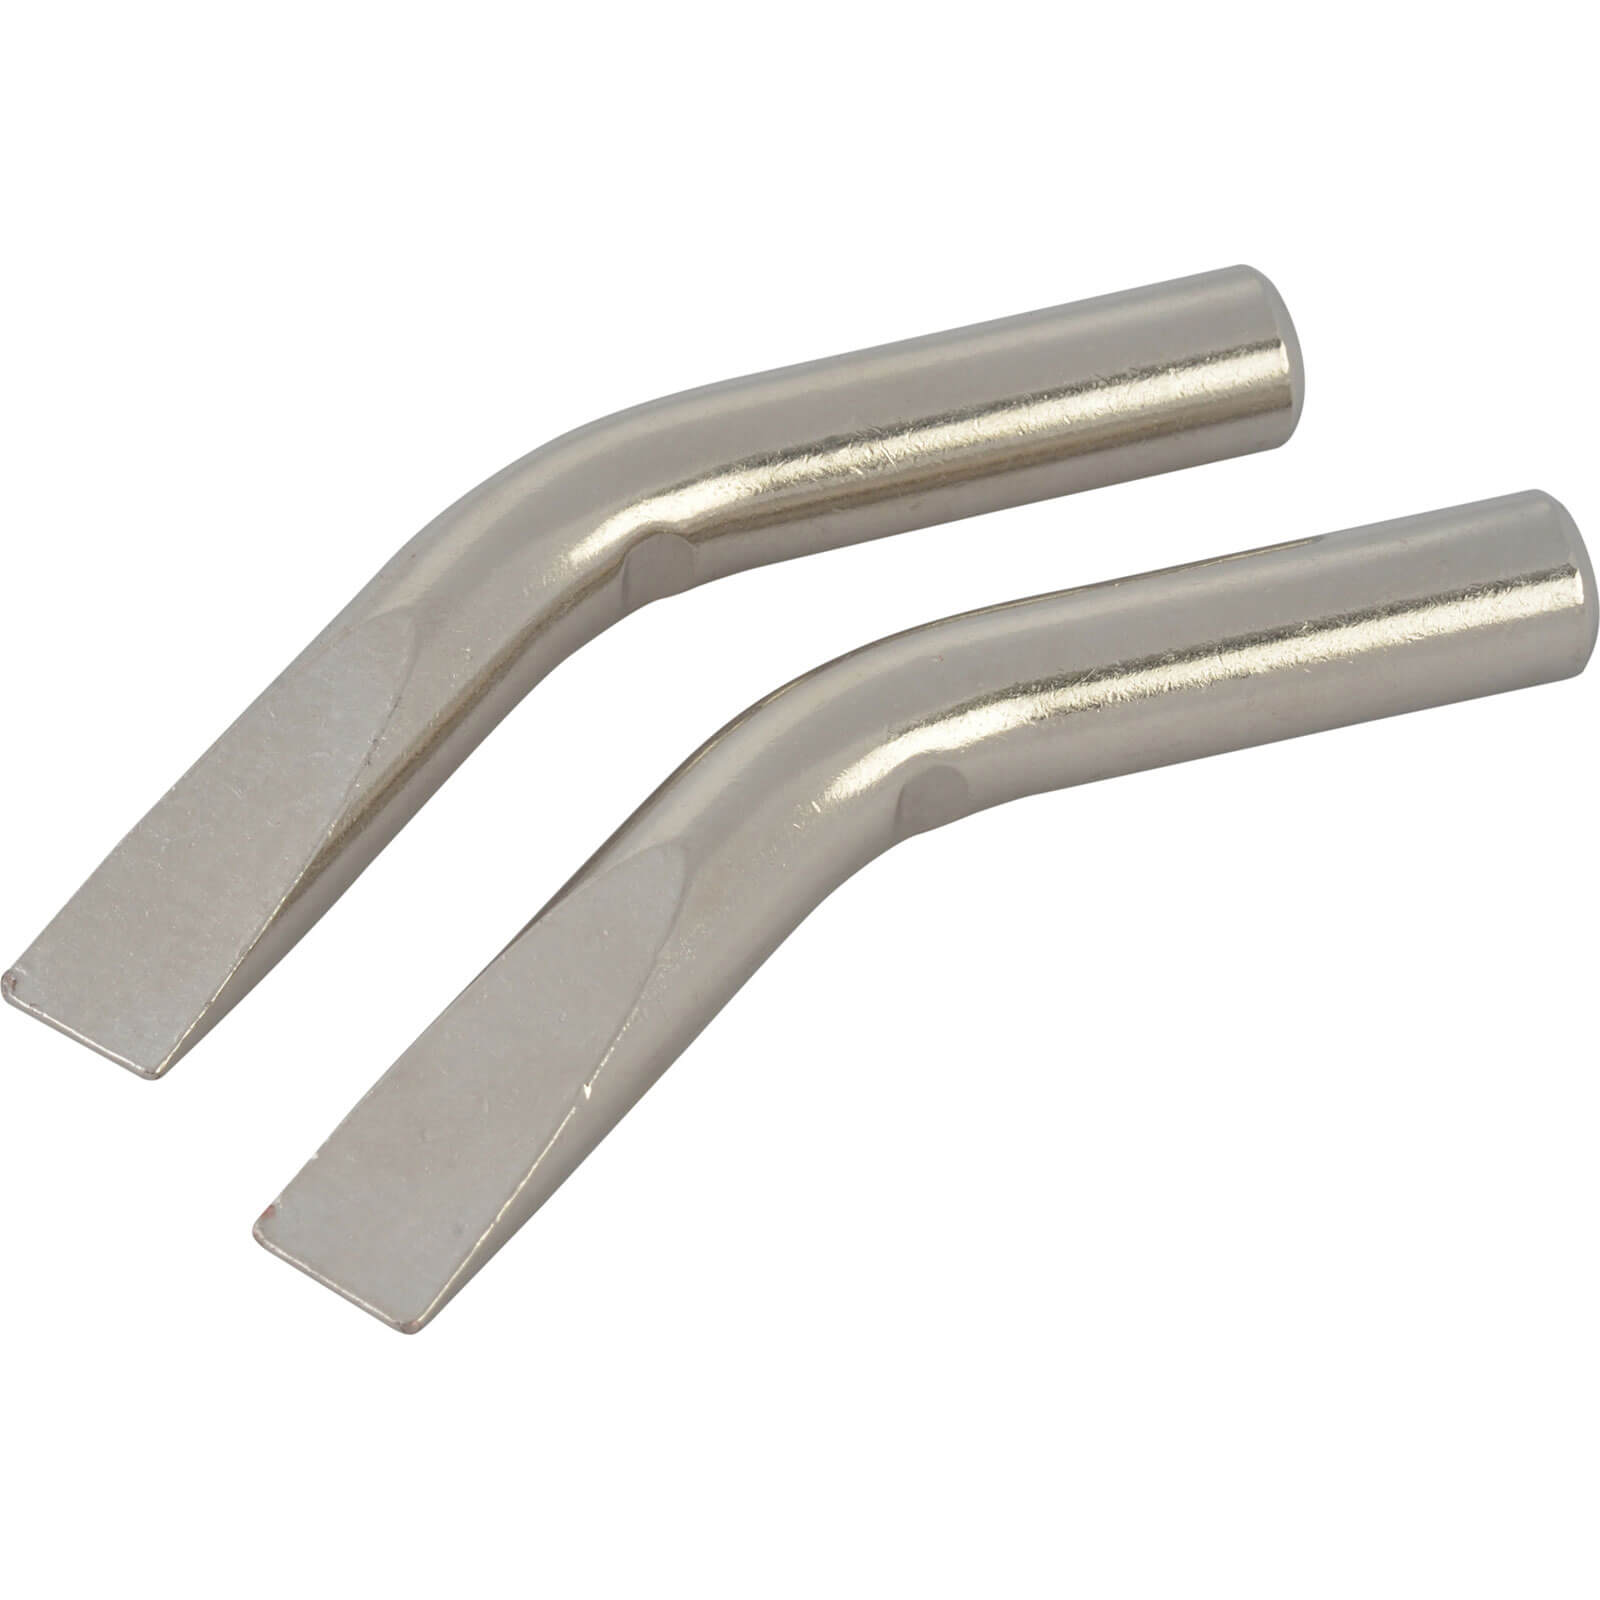 Weller S8 Bent Tips (2) For Si75